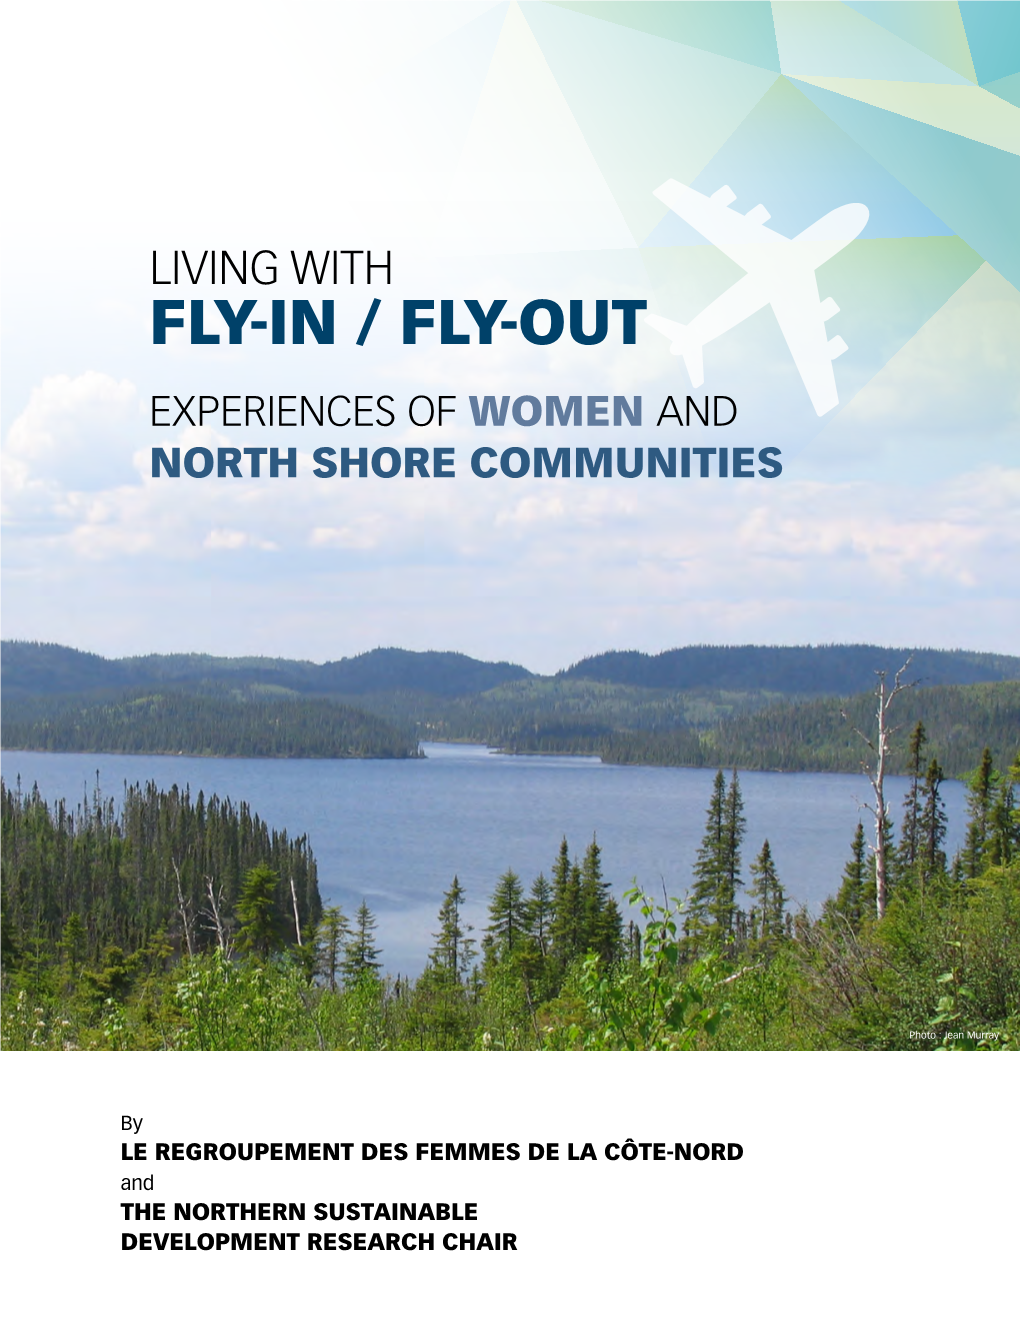 Fly-In / Fly-Out Experiences of Women and North Shore Communities